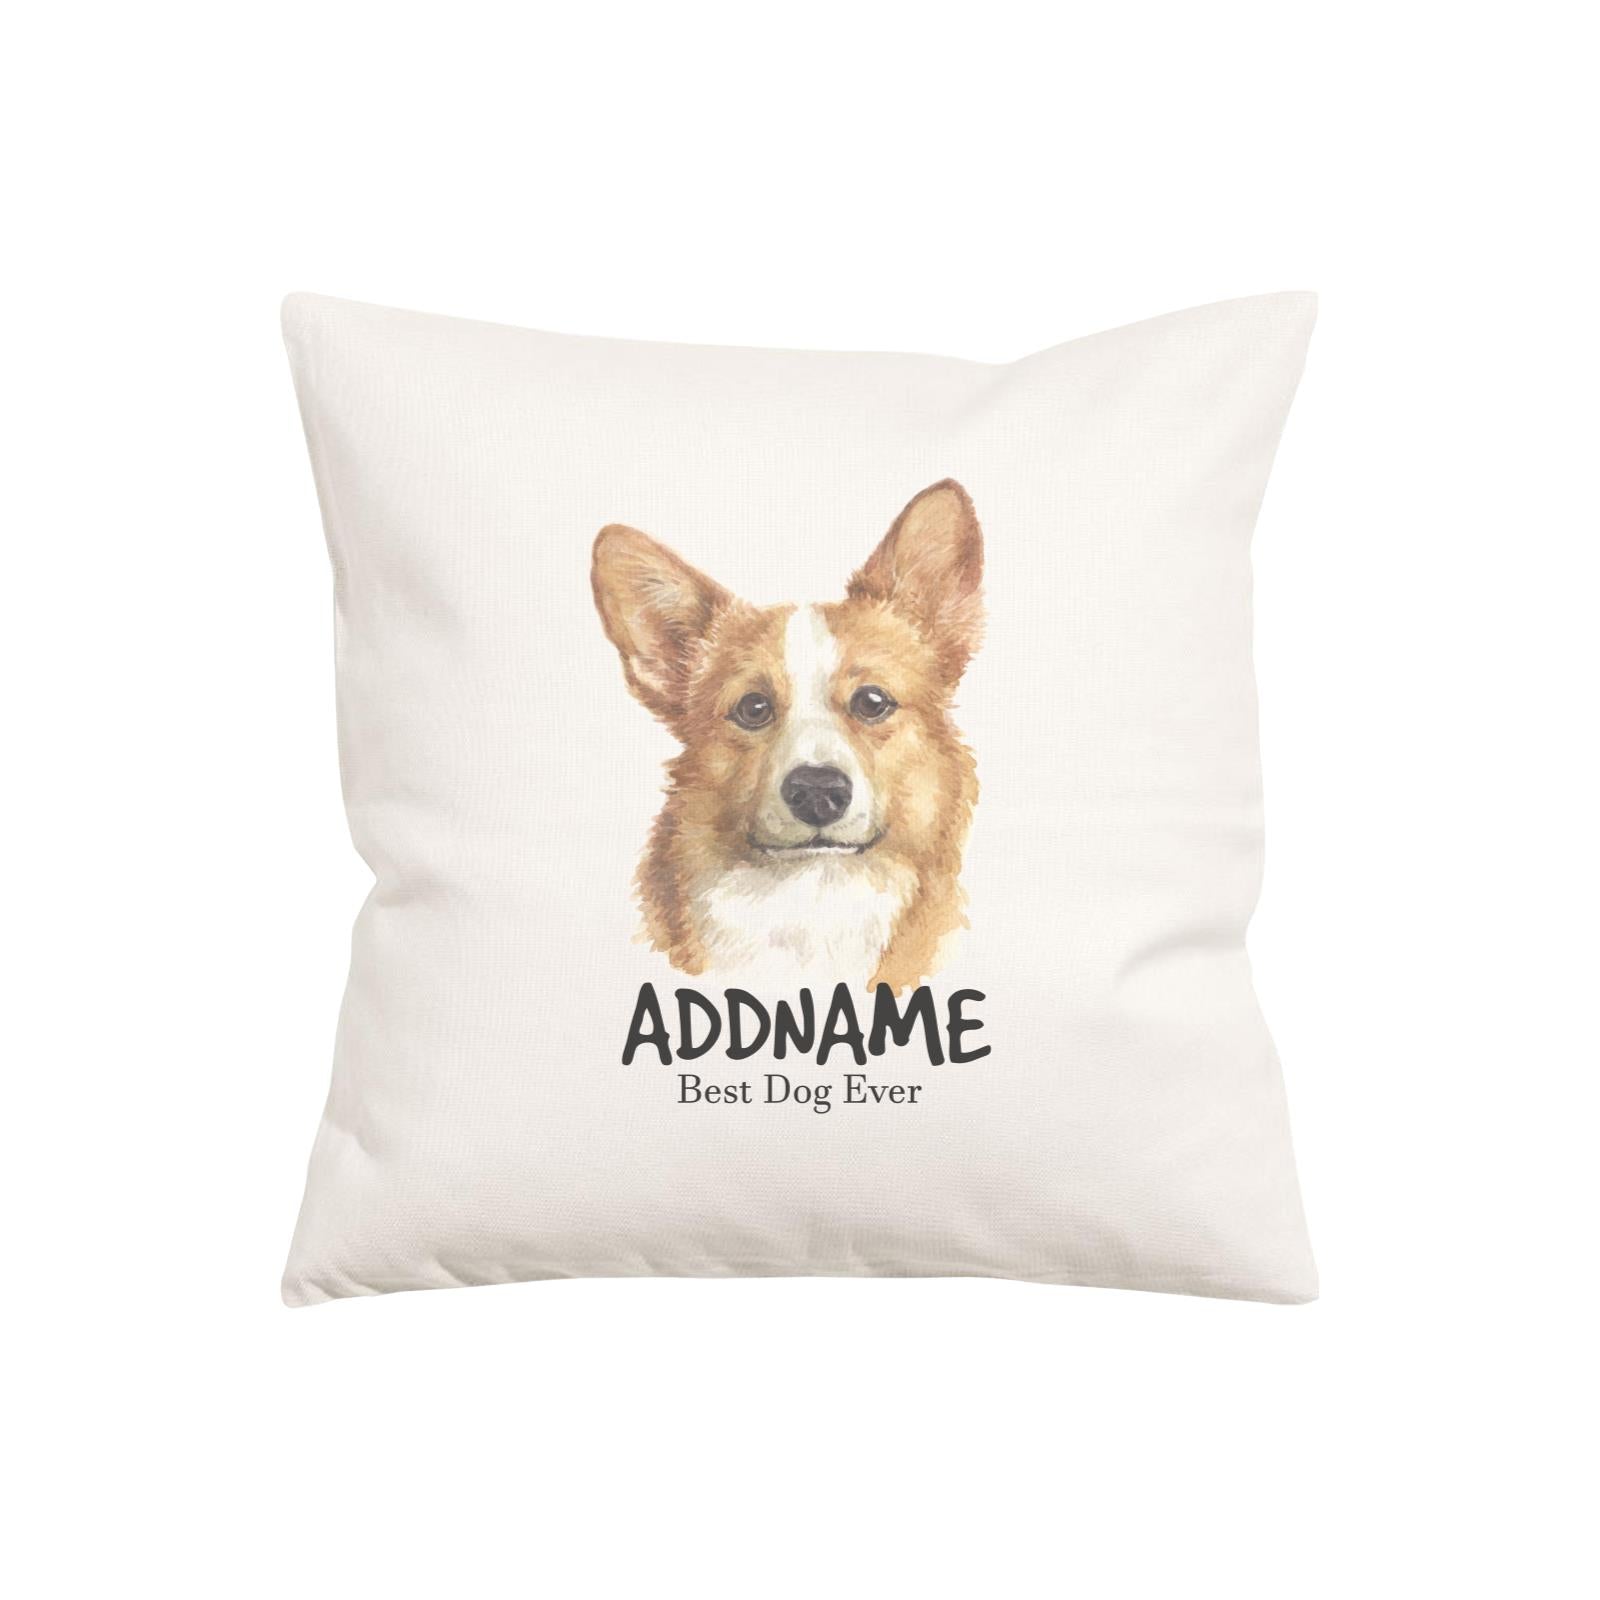 Watercolor Dog Series Welsh Corgi Best Dog Ever Addname Pillow Cushion